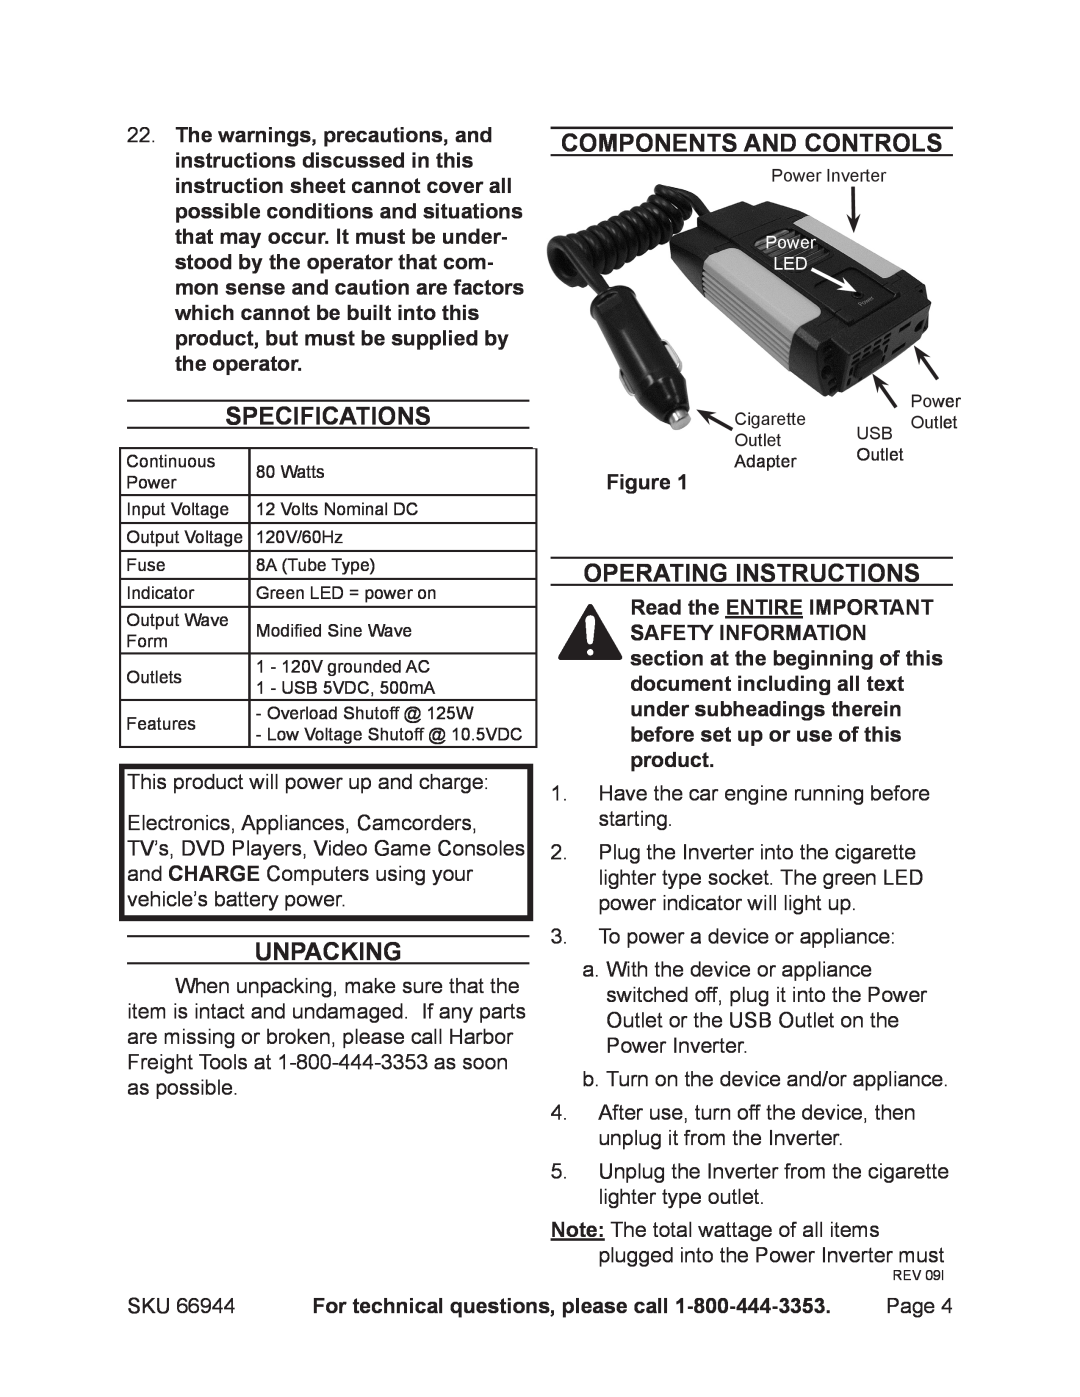 Chicago Electric 66944 operating instructions Specifications, Unpacking, Components and Controls, OPERATING Instructions 